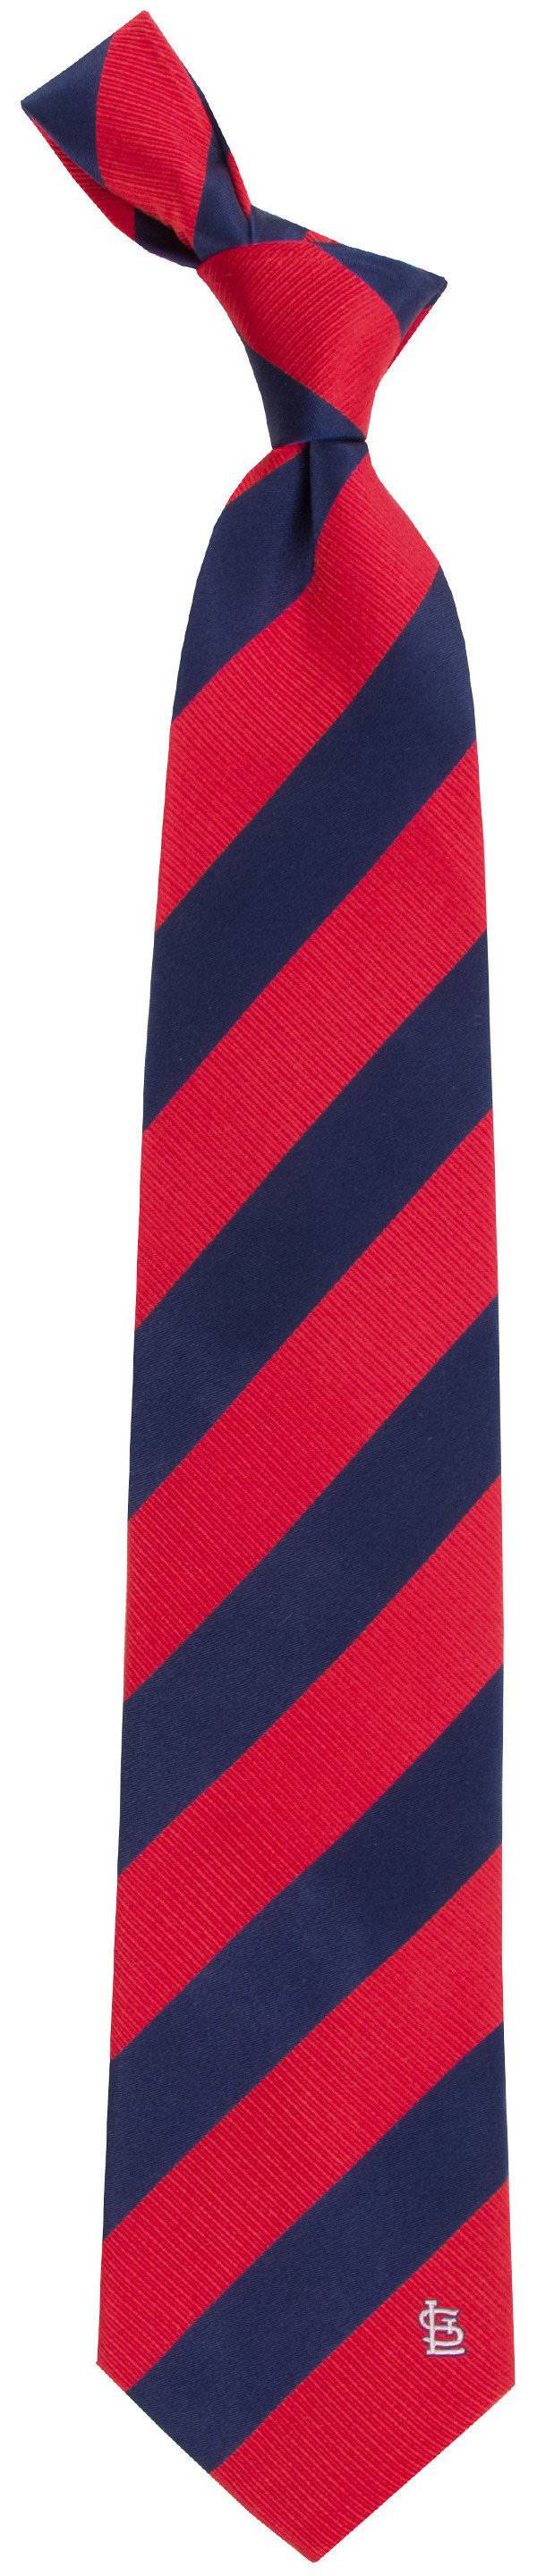 Eagles Wings St. Louis Cardinals Woven Silk Necktie product image